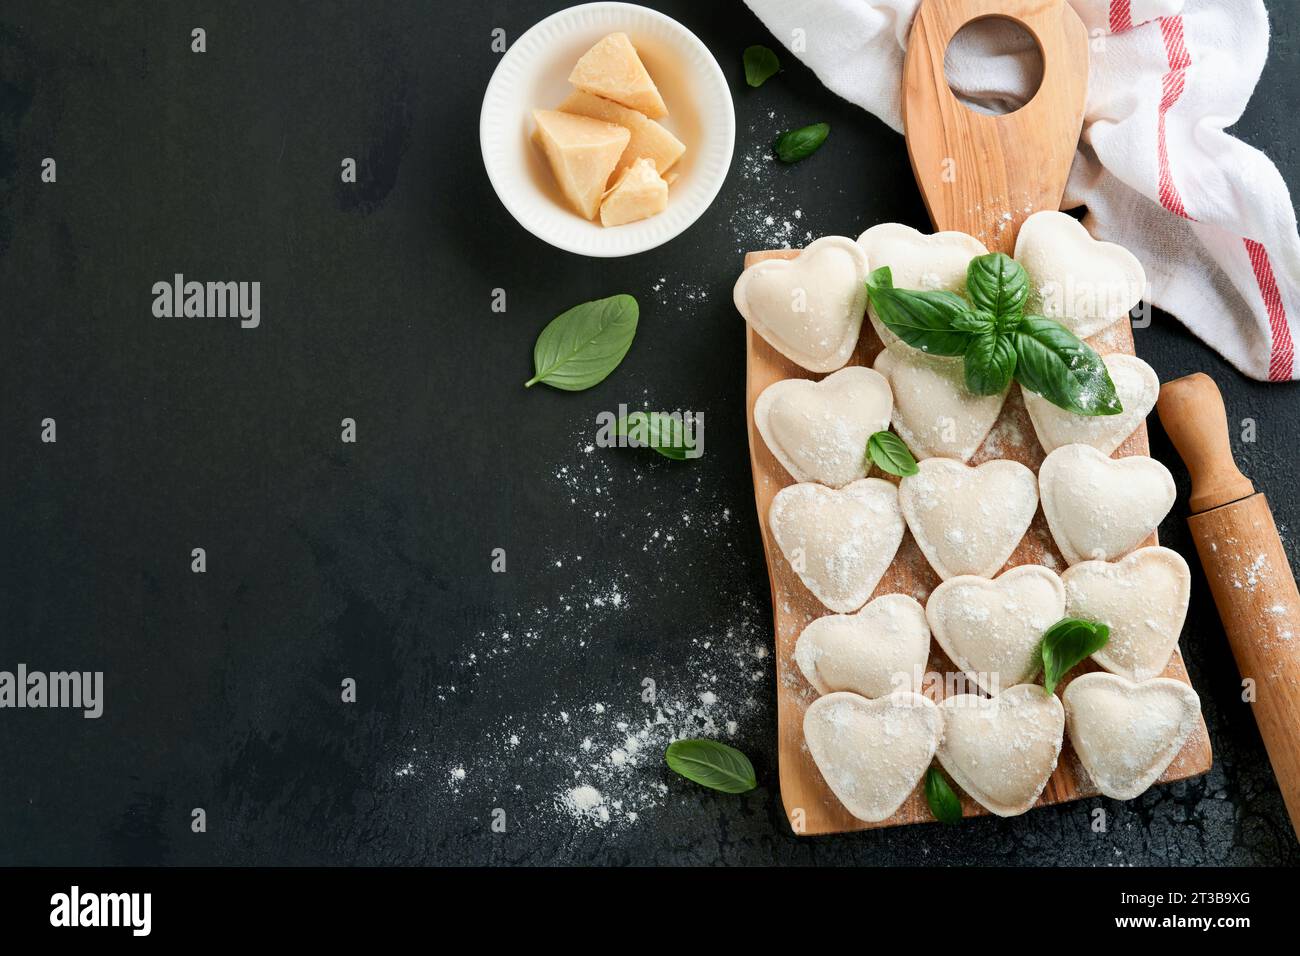 Italian ravioli pasta in heart shape. Tasty raw ravioli with flour and basil on dark background. Food cooking ingredients background. Valentines or Mo Stock Photo